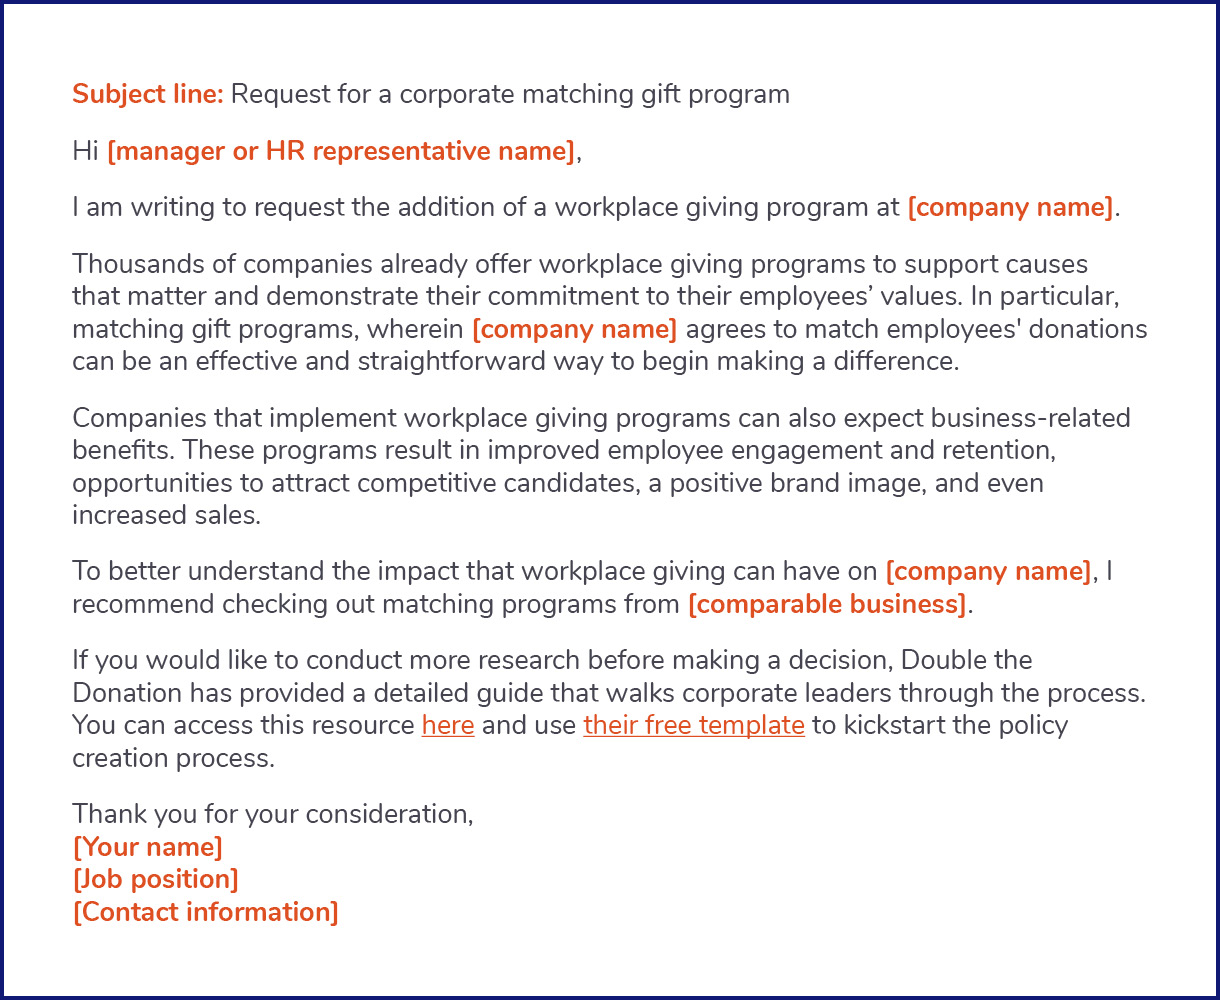 The image is a template letter for supporters to send to relevant parties at their employer to advocate for starting a matching gifts program. 